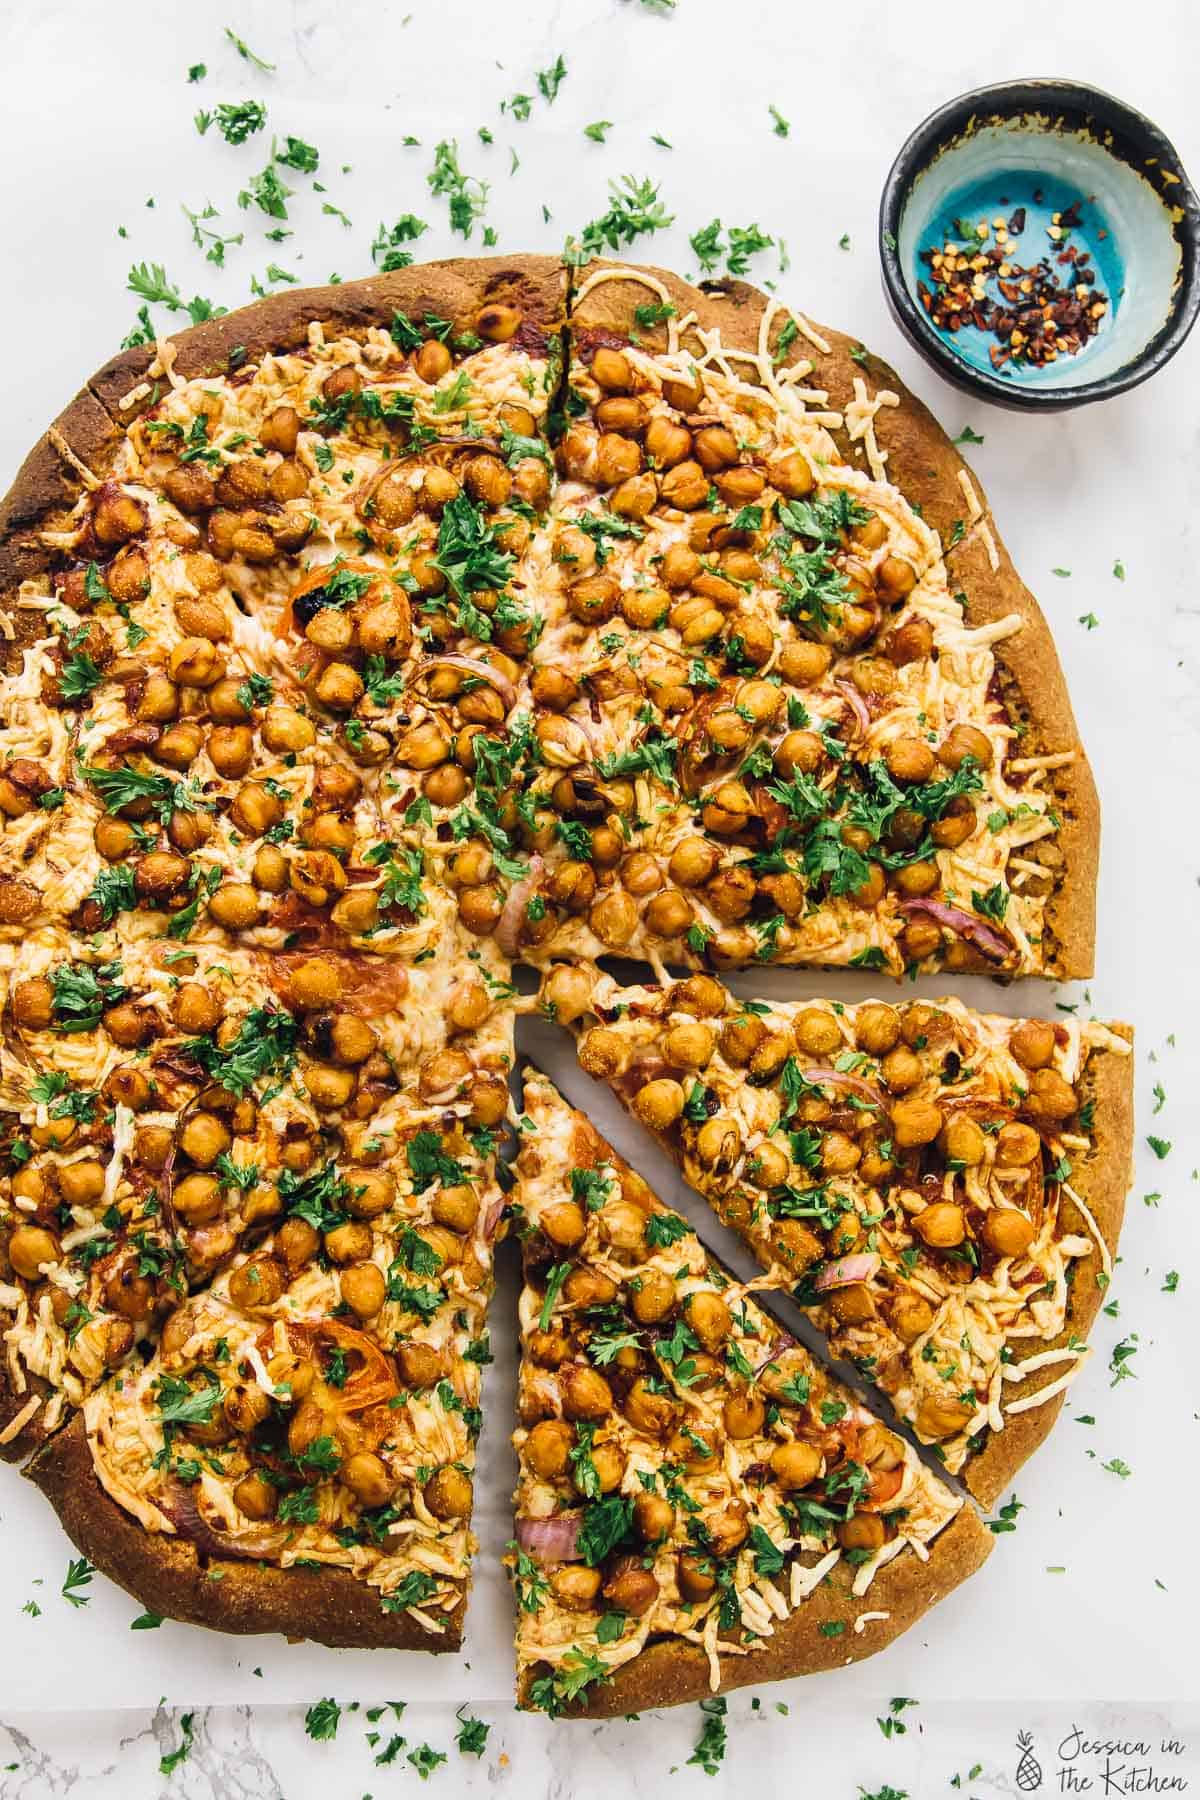 Overhead view of whole spicy BBQ chickpea pizza with two slices pulled away slightly